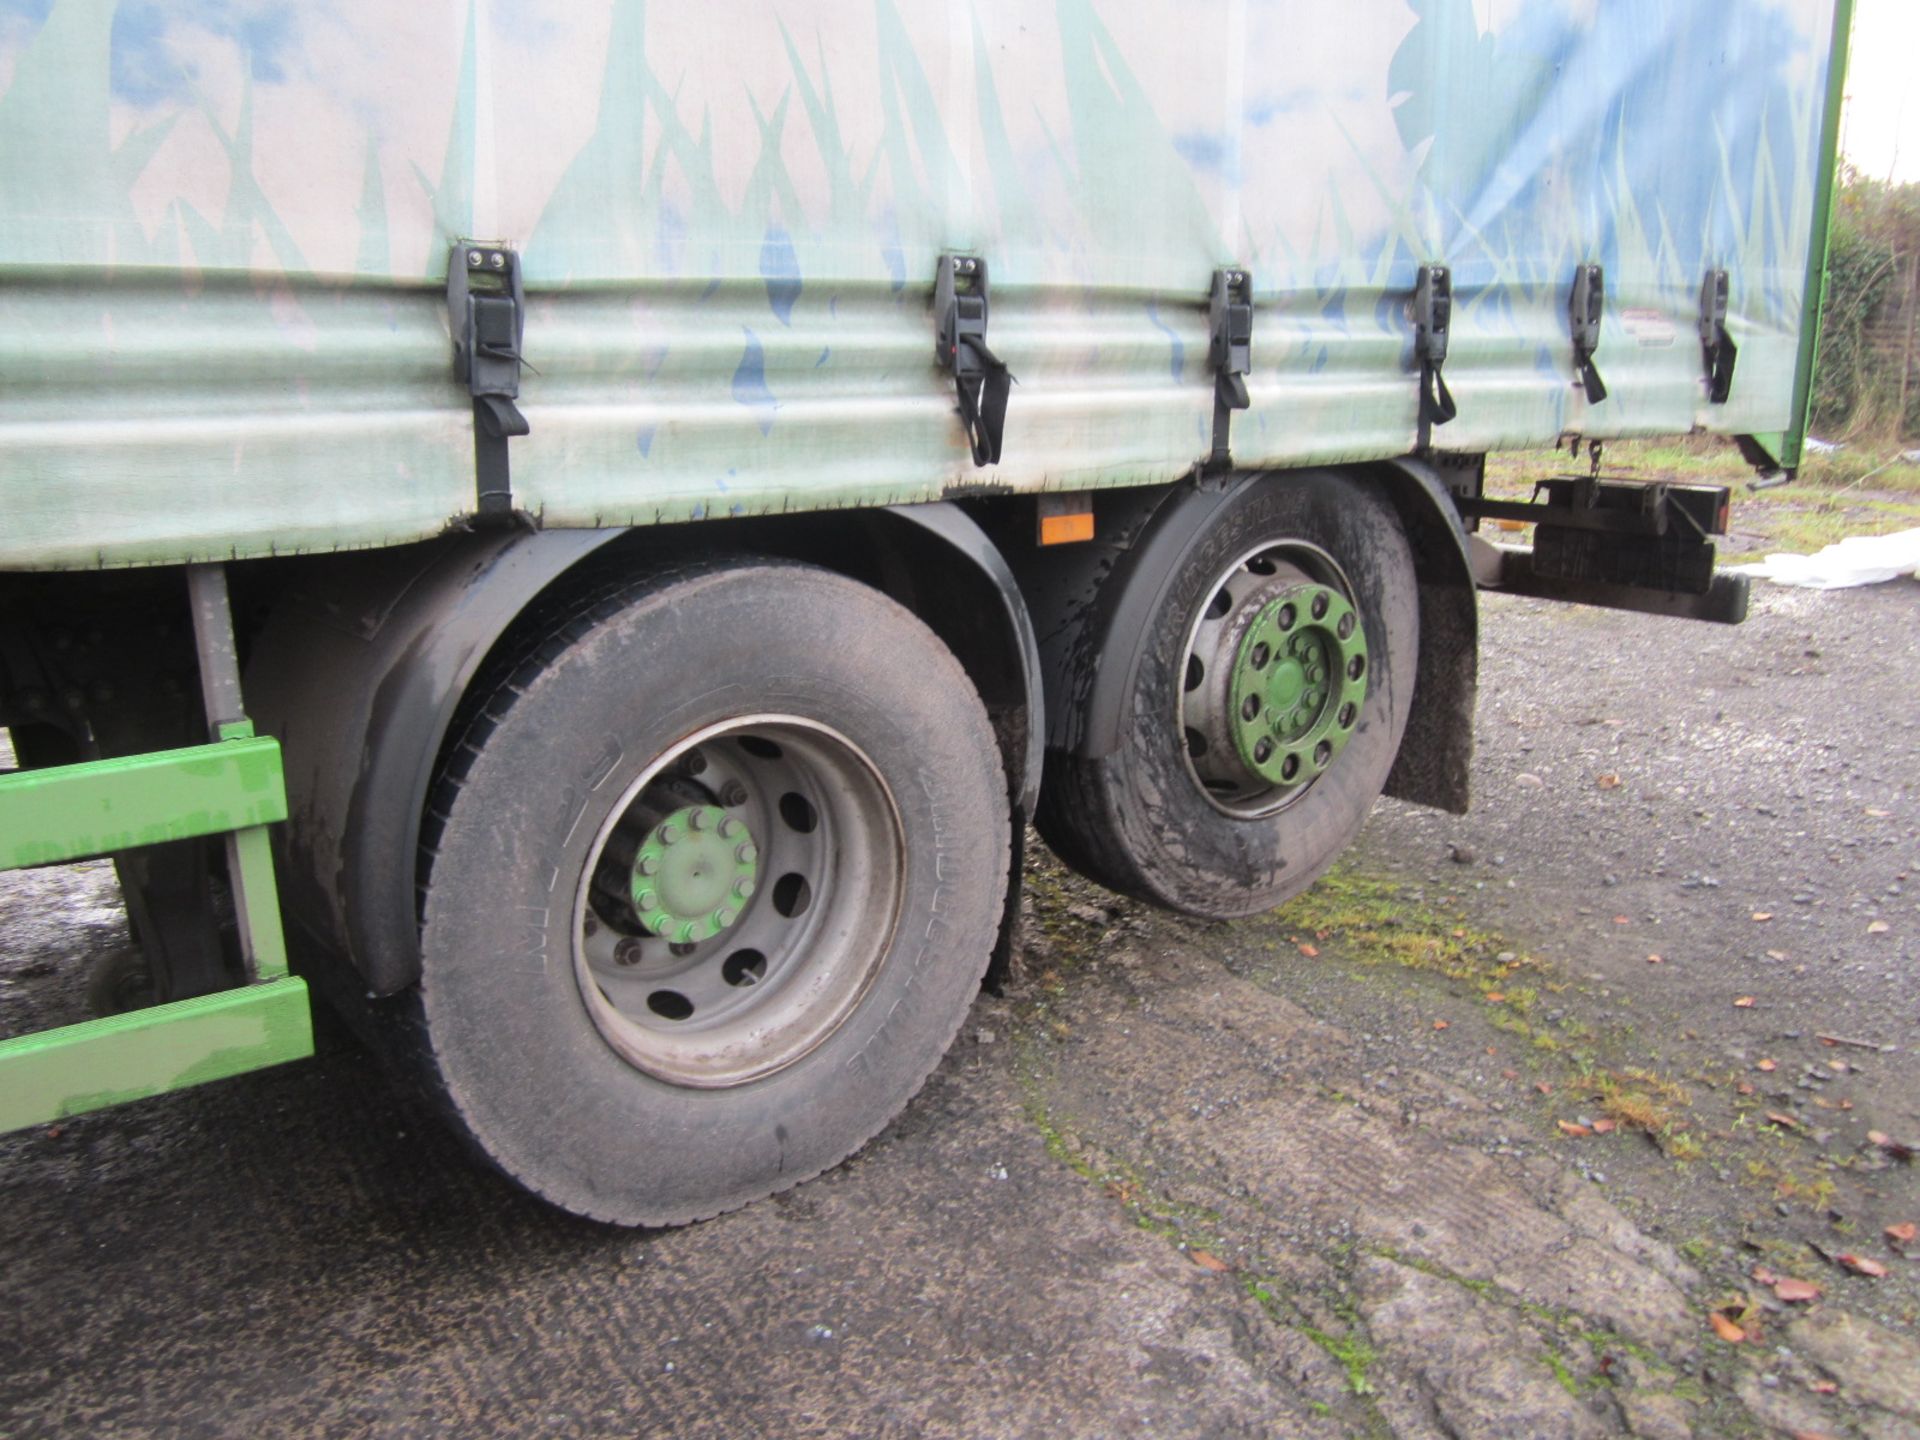 2008 Mercedes Axor 6x2 Curtain Sider, Rear Lift Axle, 26t Gross, 463kms, WLZ 4082 - Image 4 of 10